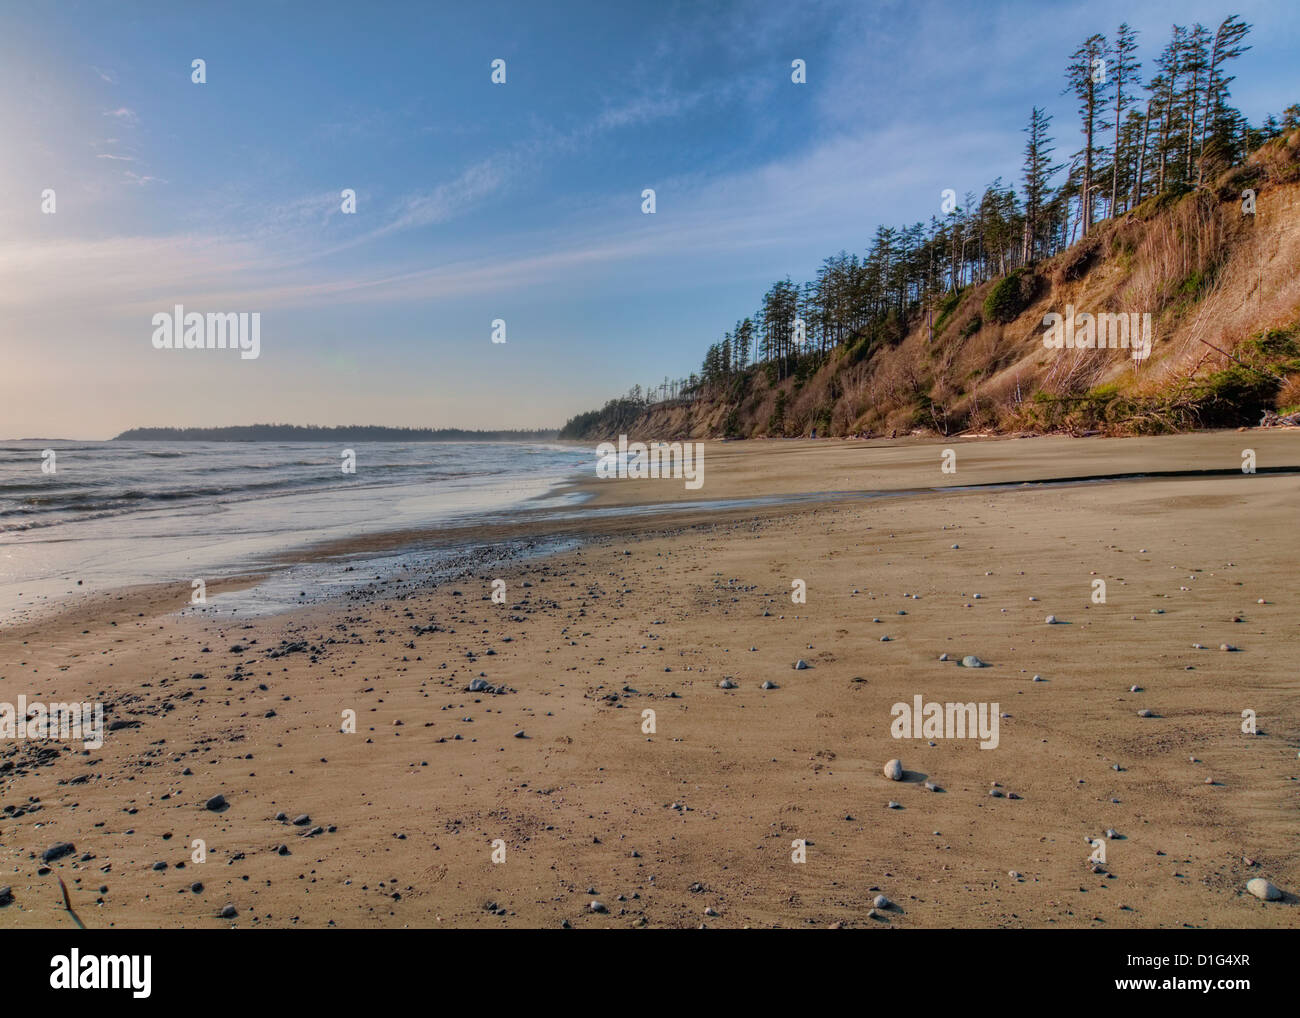 This beach is near Tofino on the West coast of Vancouver Island. Stock Photo